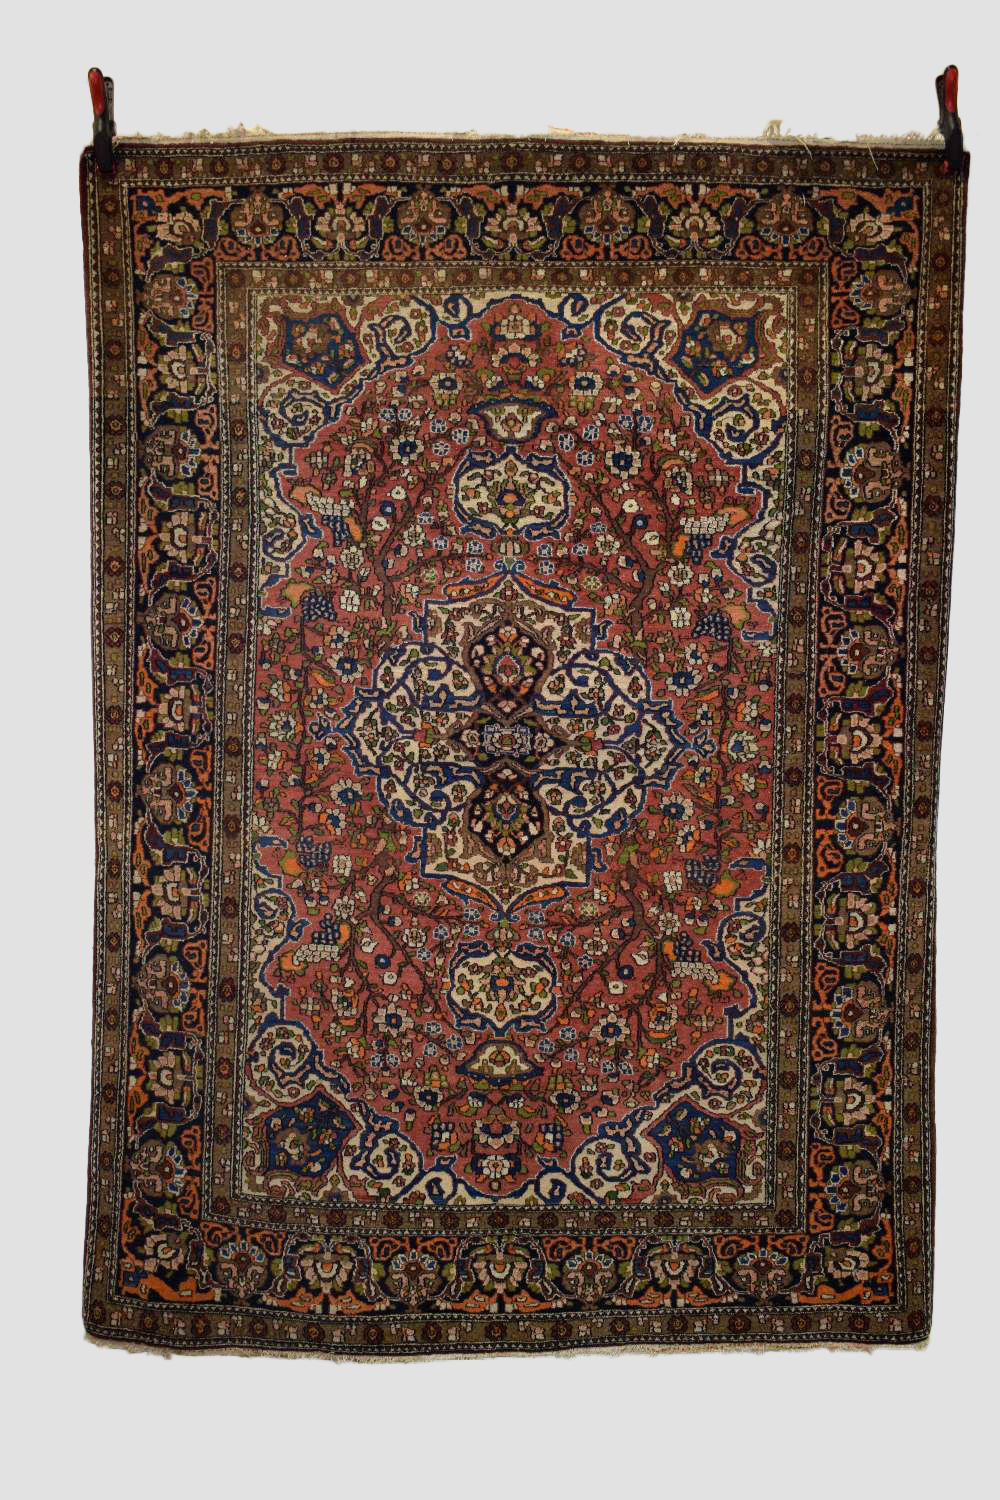 Esfahan rug, central Persia, circa 1930s-40s, 6ft. 11in. X 4ft. 10in. 2.11m. X 1.47m. Light red